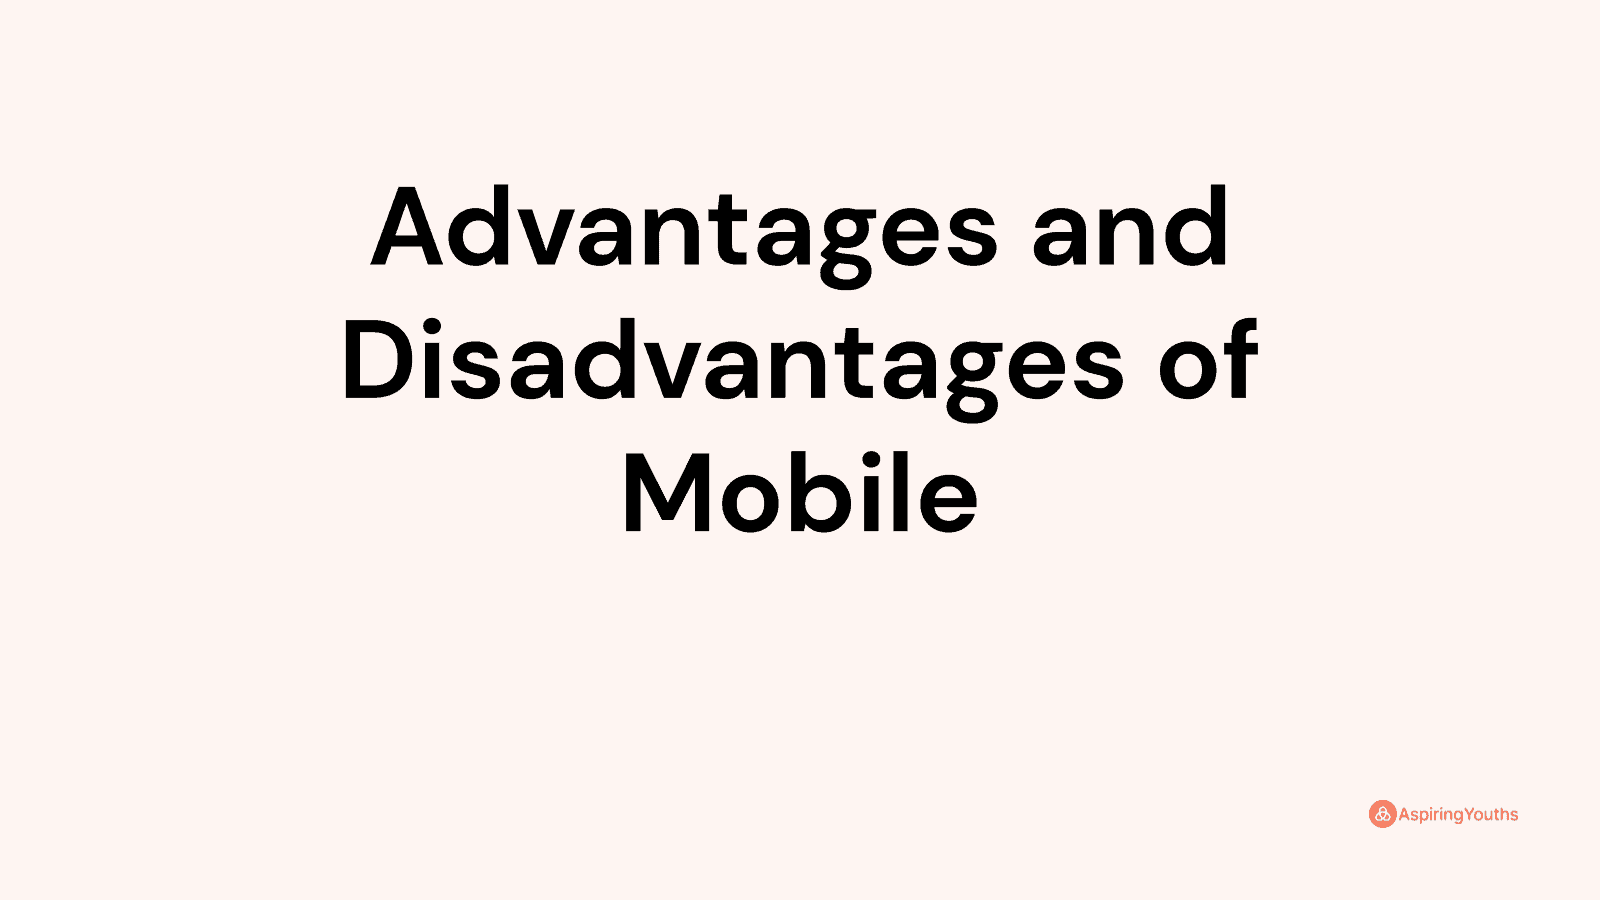 Advantages and disadvantages of Mobile